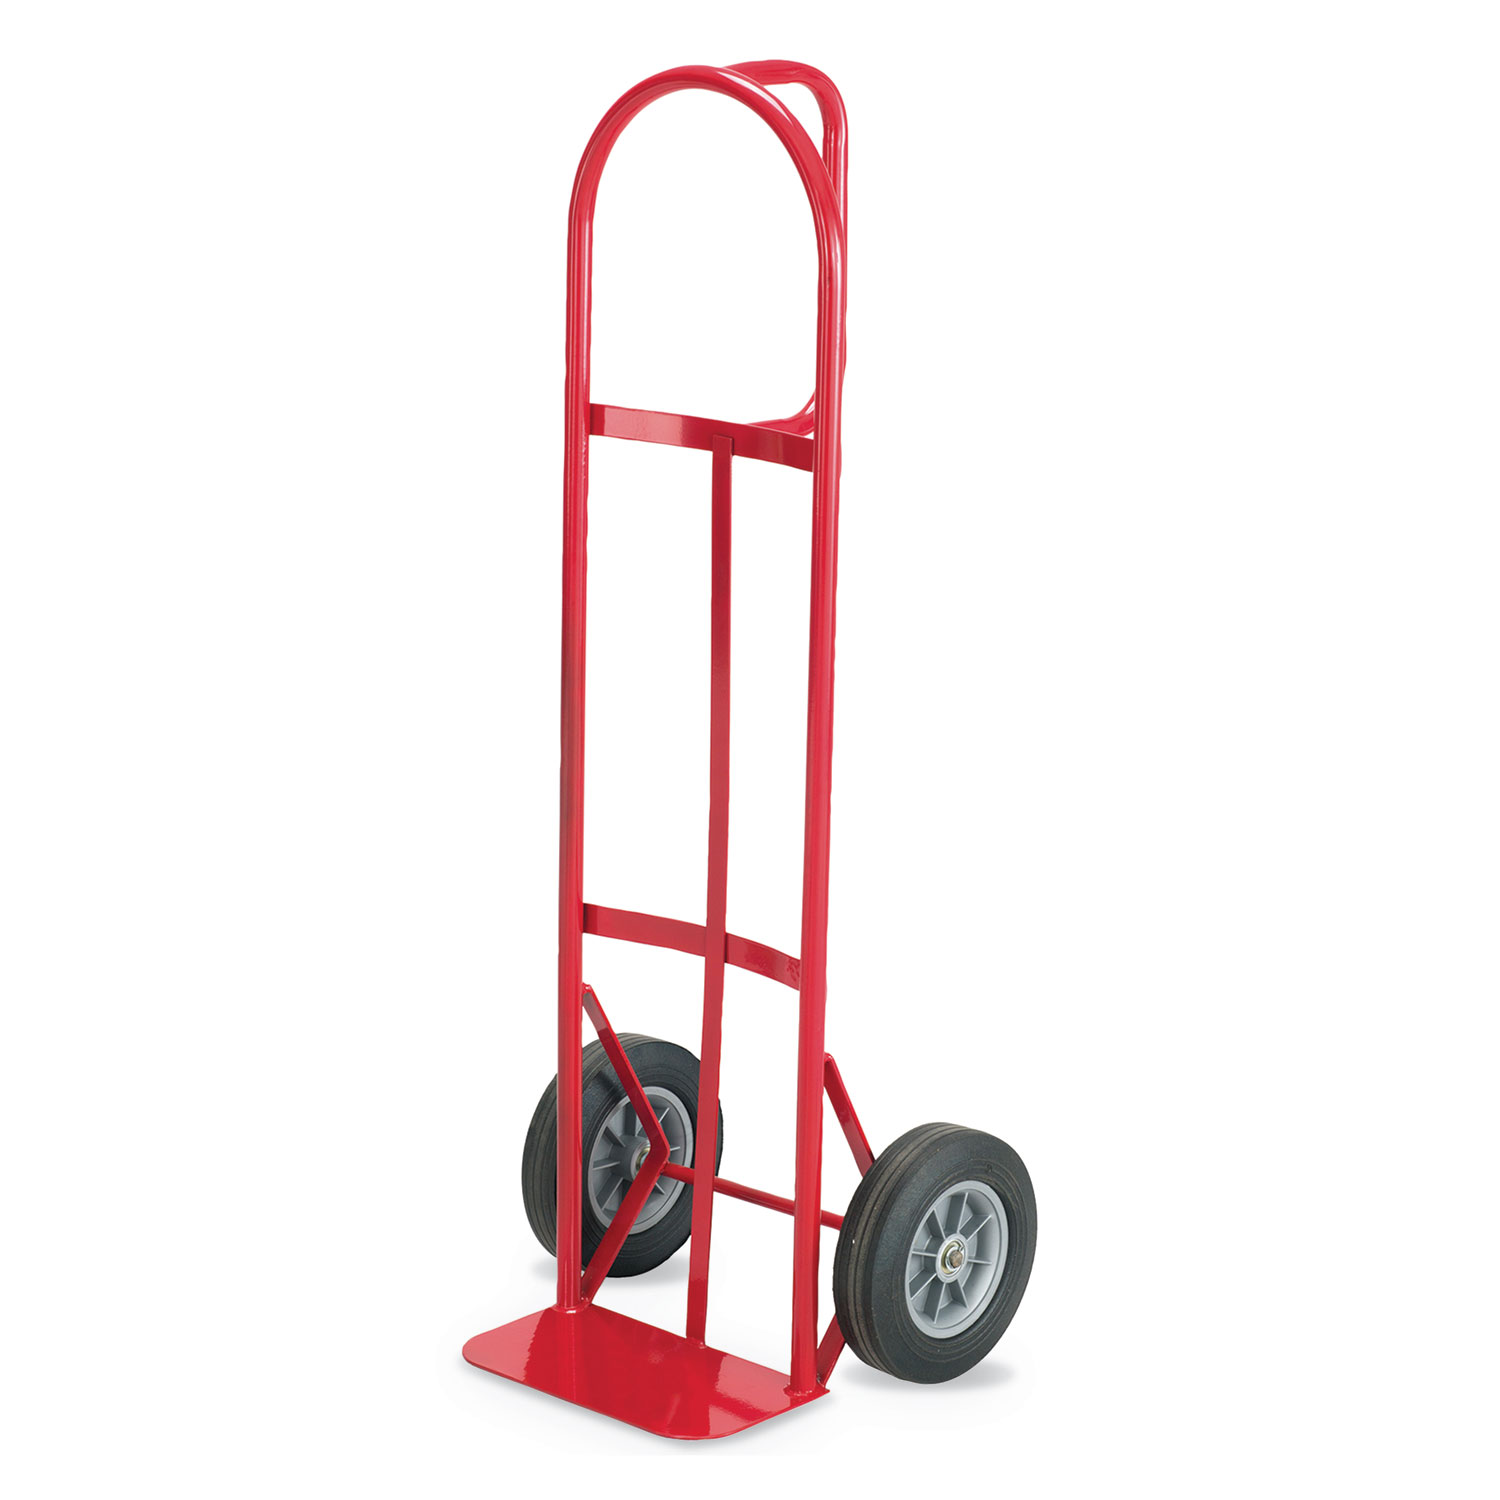  Safco 4084R Two-Wheel Steel Hand Truck, 500 lb Capacity, 18w x 47h, Red (SAF4084R) 